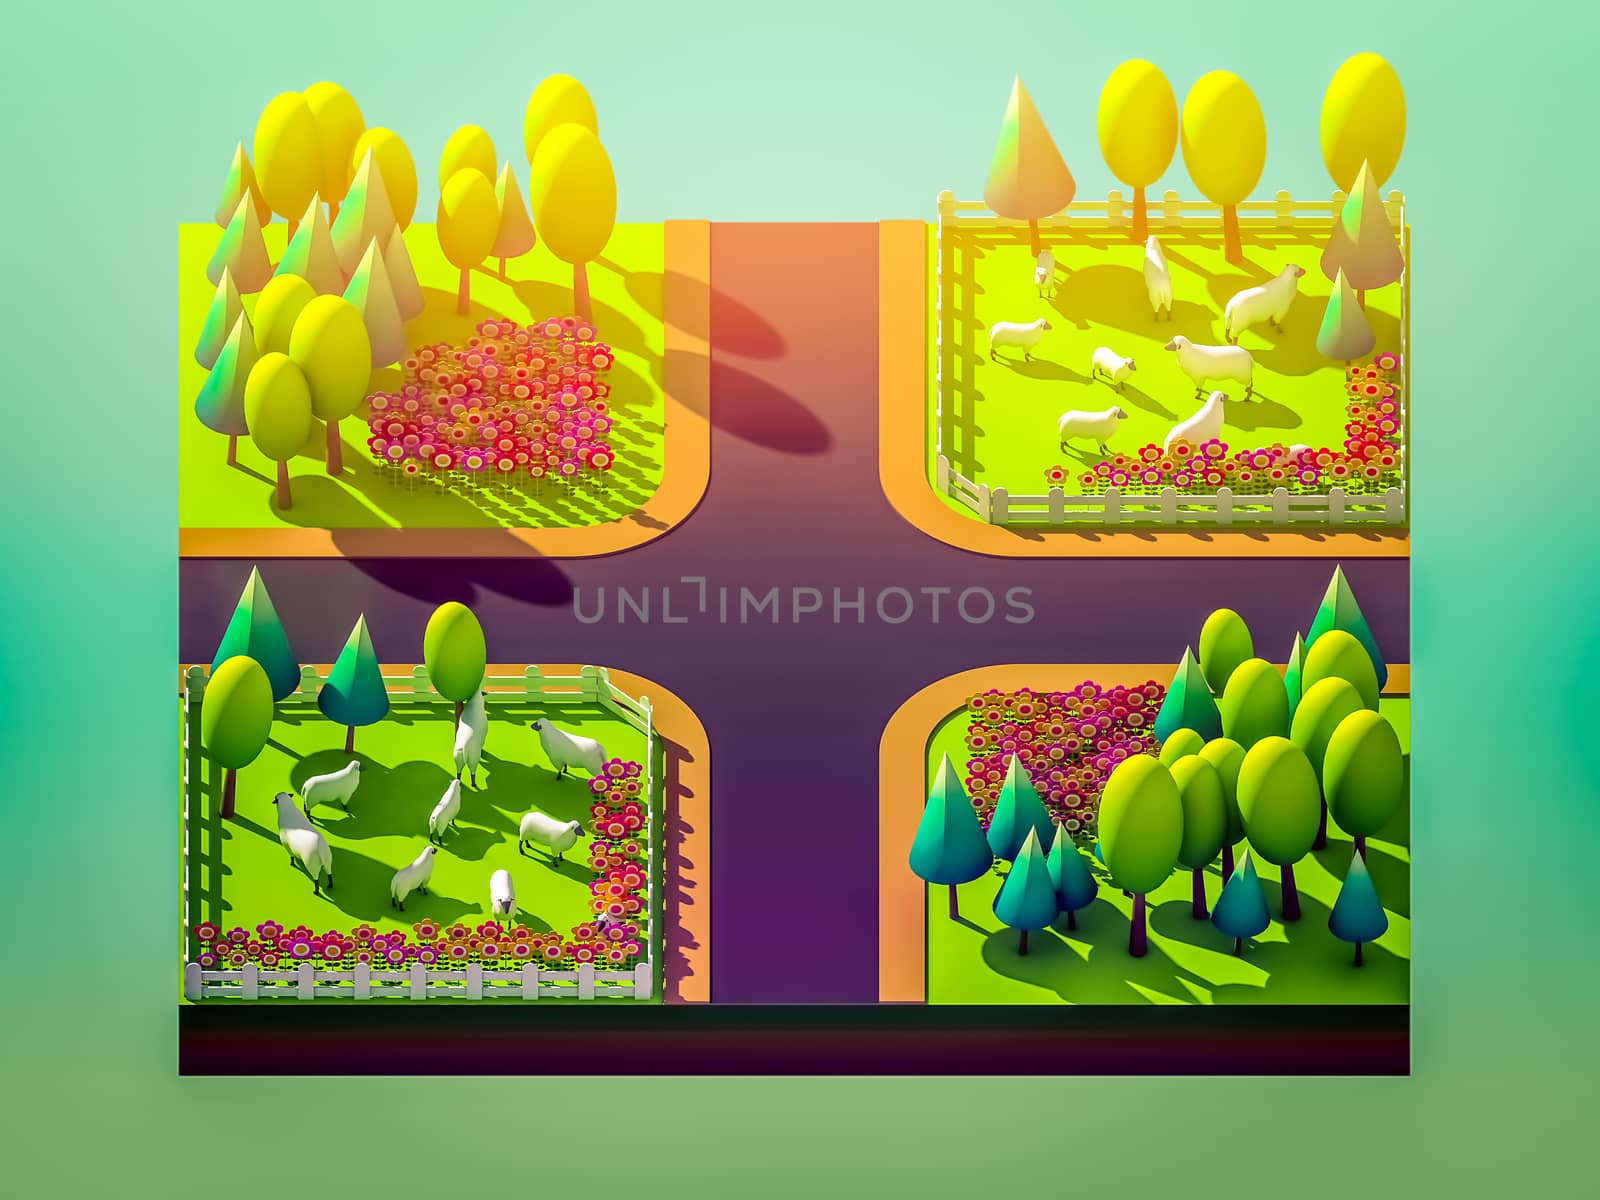 Sheep in the landscape, isometric view by teerawit